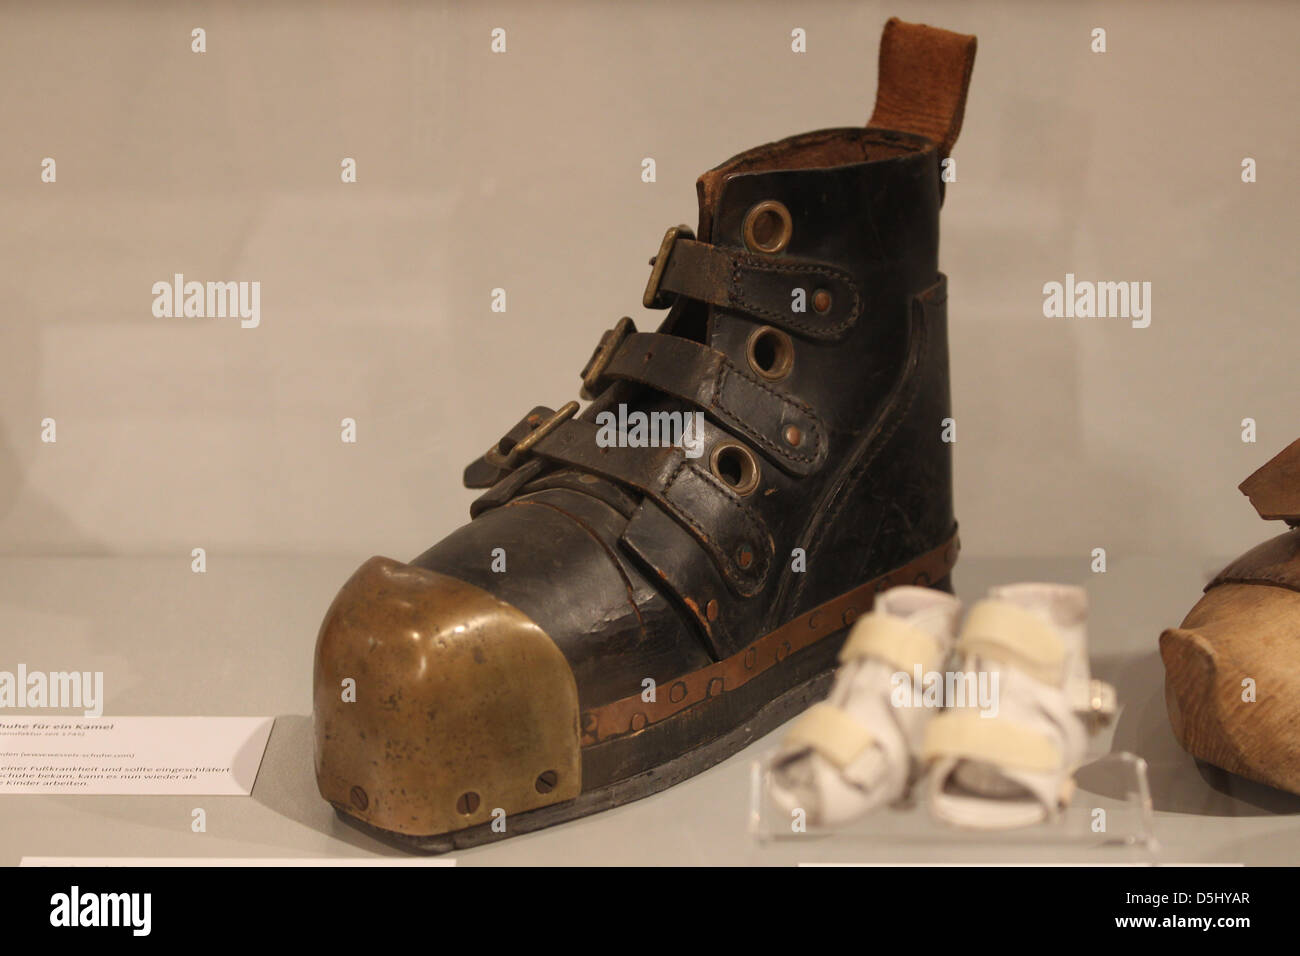 Divinf boots made of leather and lead are on display in Bonn, Germany, 19  September 2012. The exhibition 'Shoe Tic' presents footwear from as far back  in history as the era of